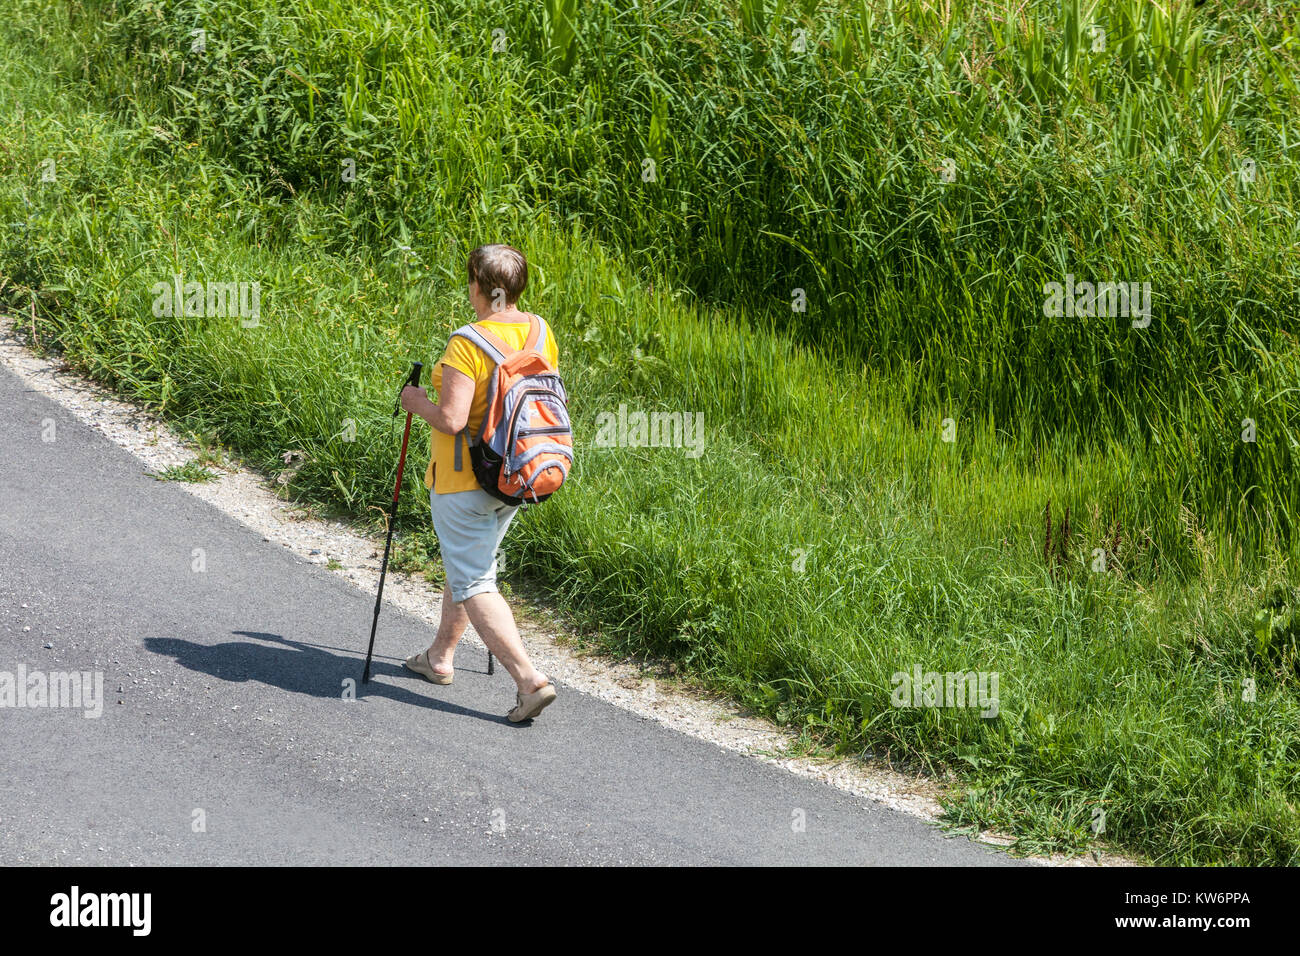 Elderly woman Nordic walking on country road, active aging Stock Photo